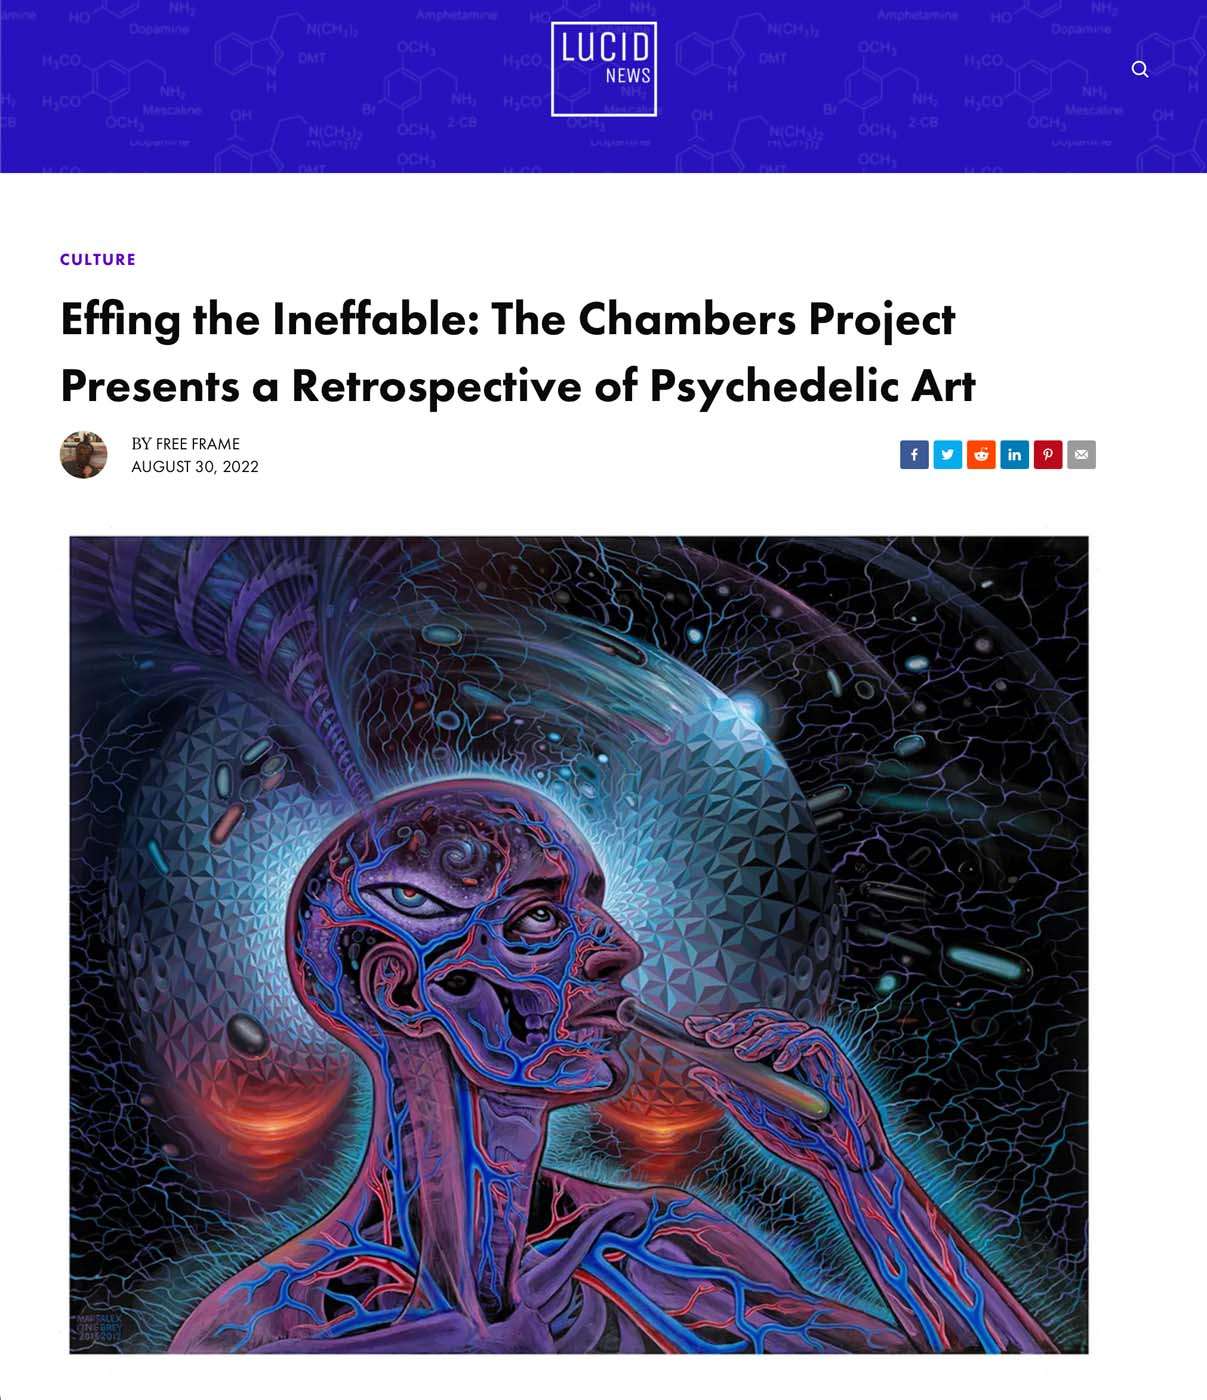 Effing the Ineffable: The Chambers Project Presents a Retrospective of Psychedelic Art